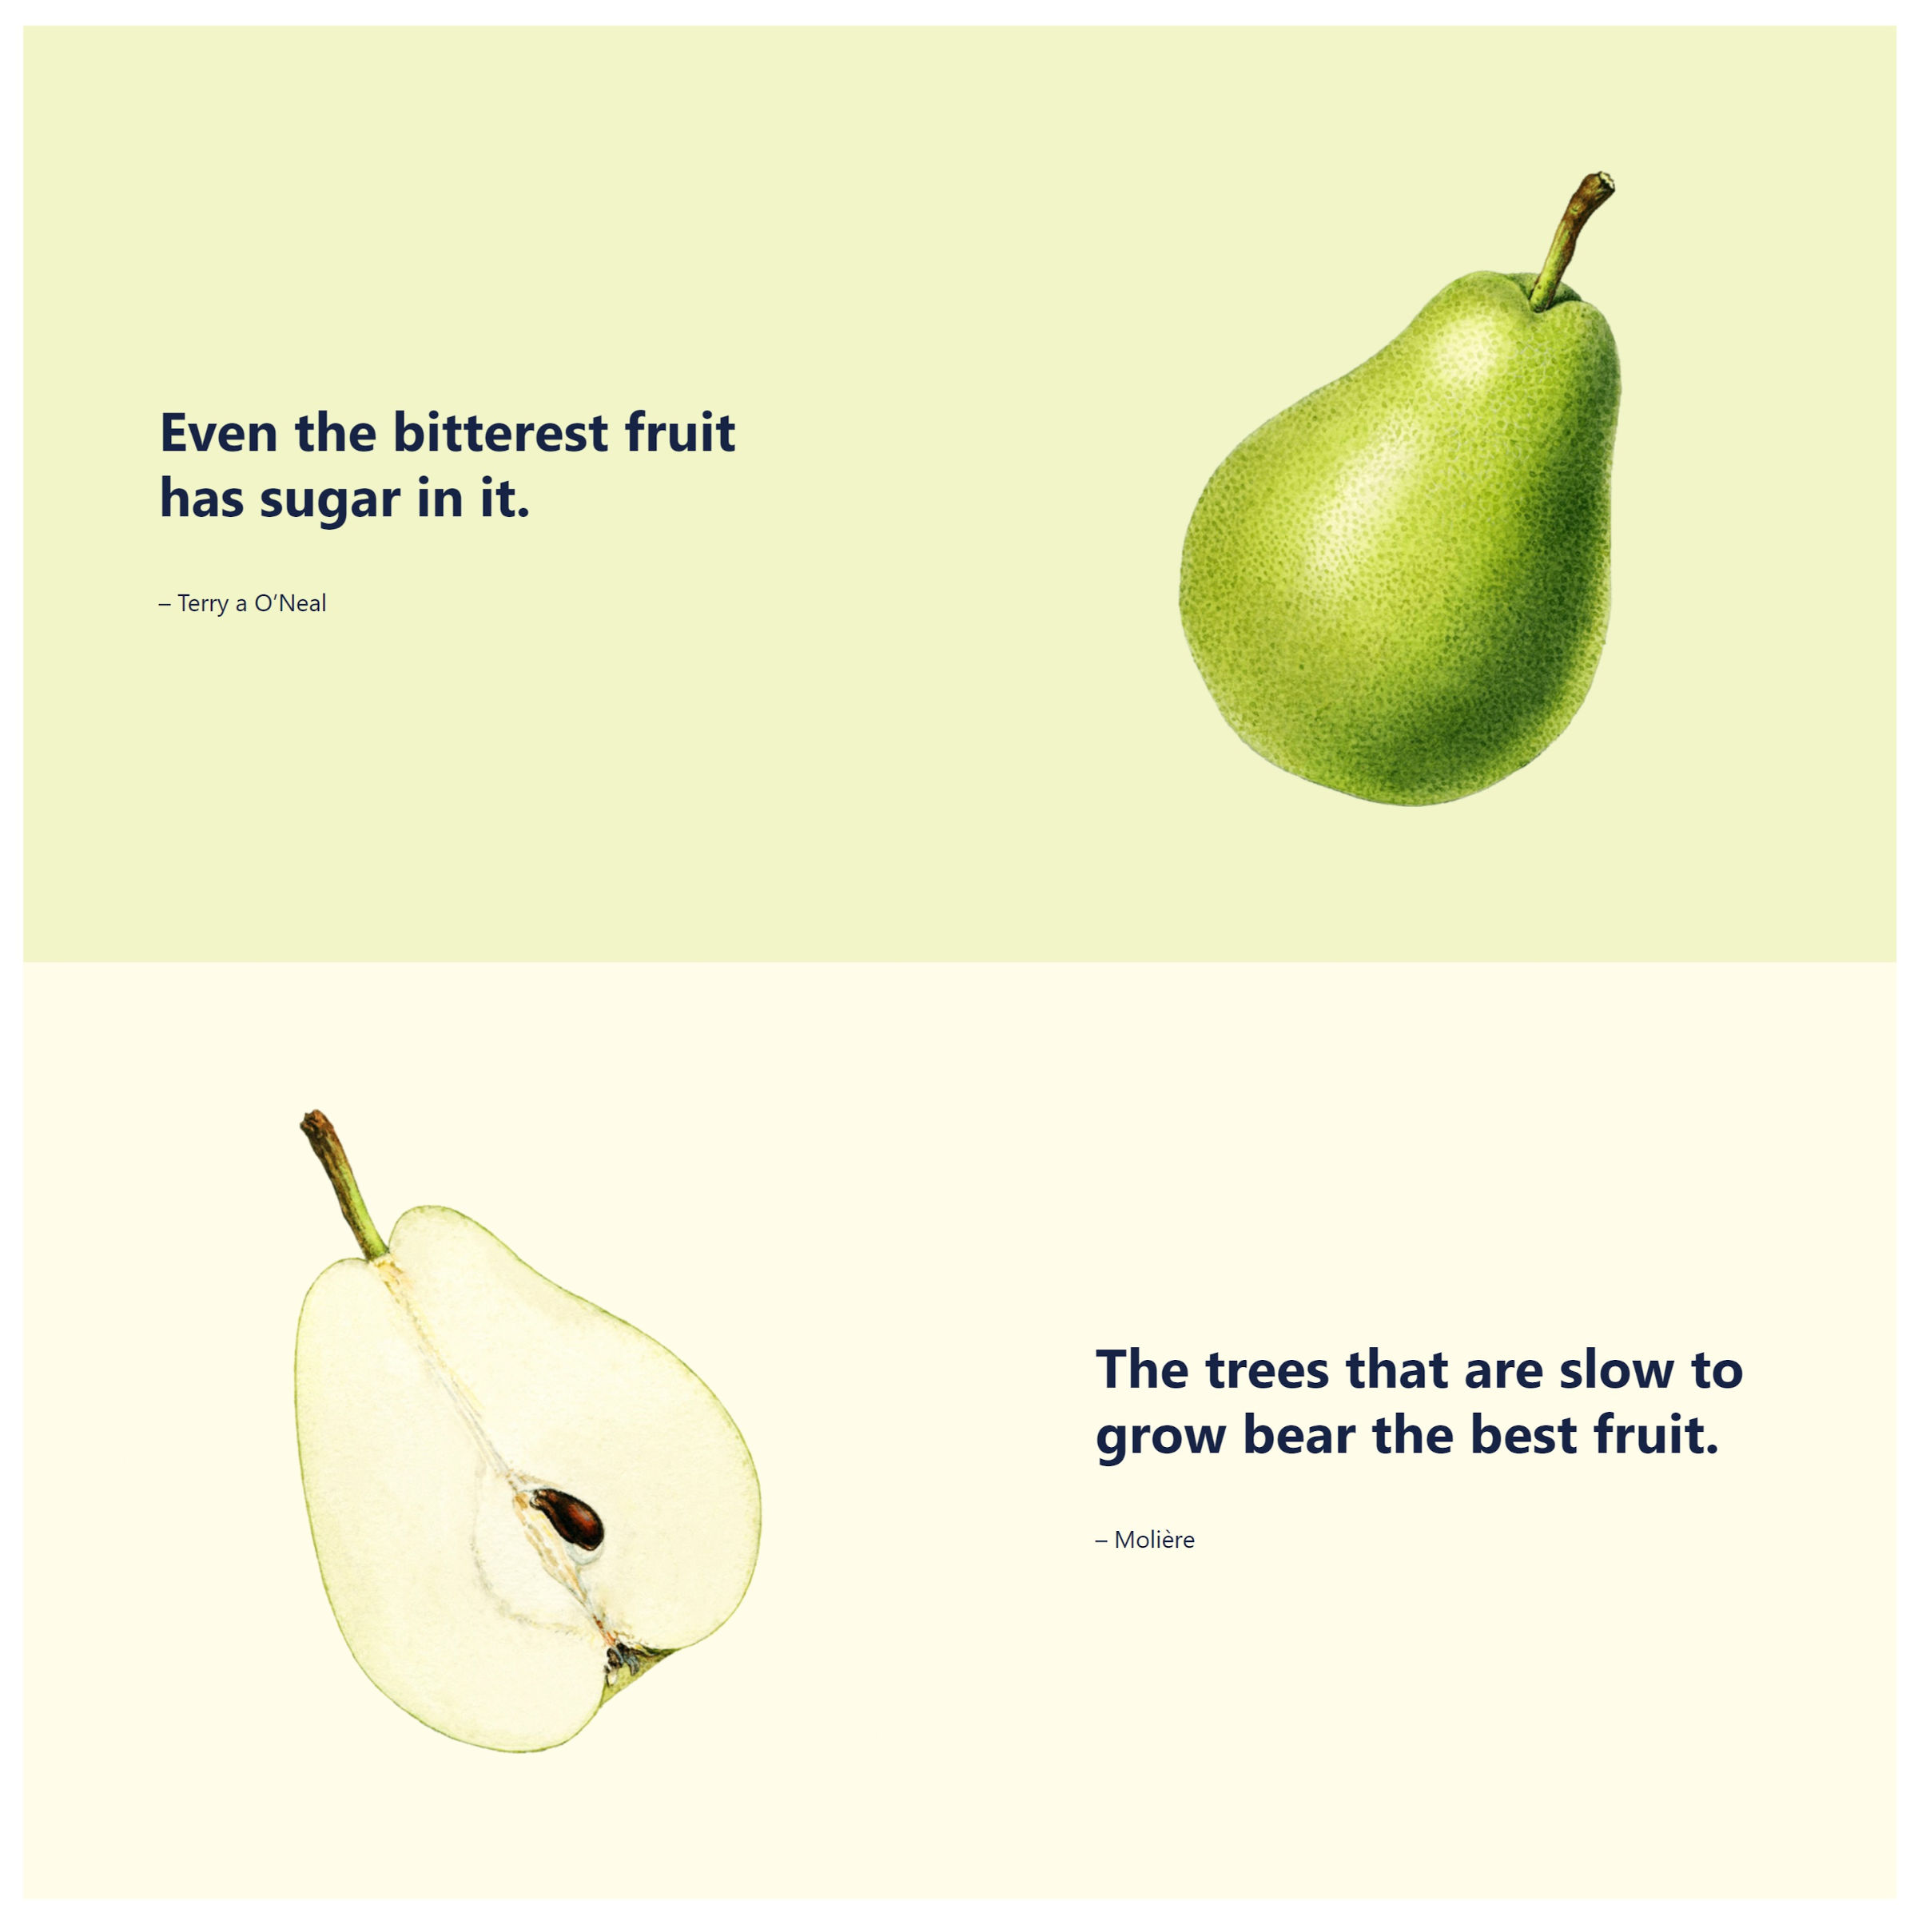 Two sections, each with a fruit and a quote.